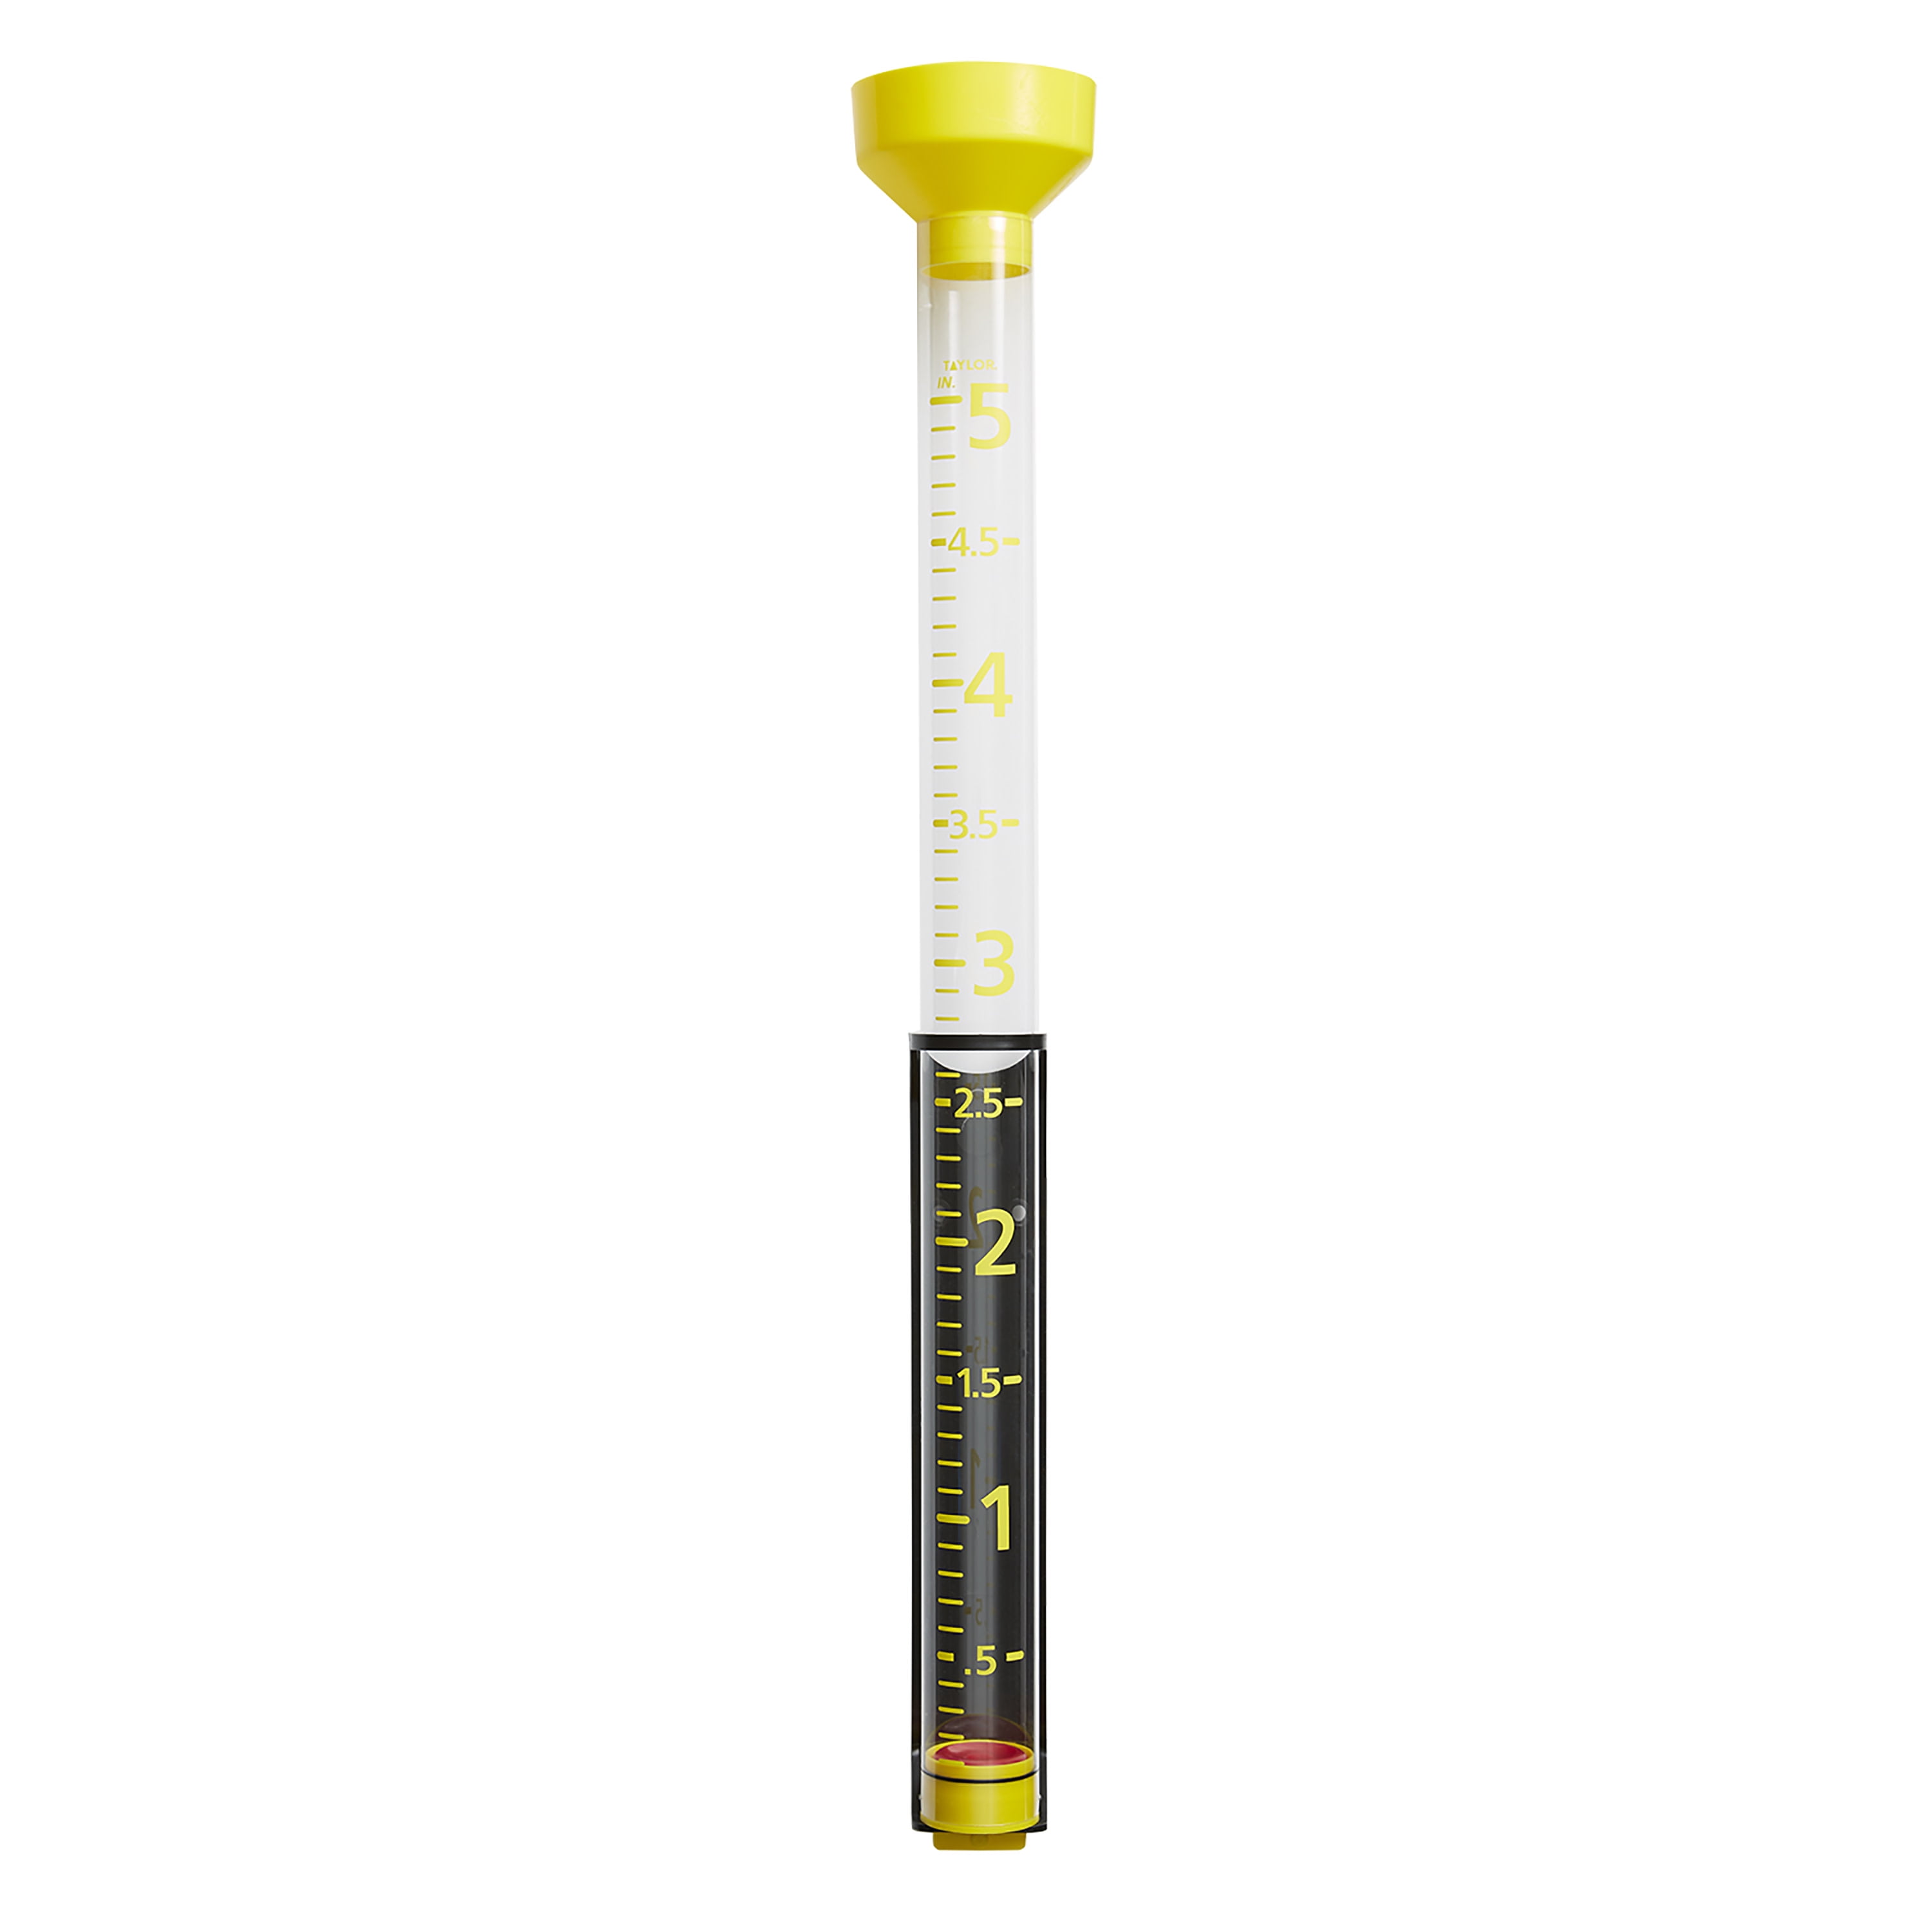 Red Taylor Precision Products 5288566 ClearVu Rain Gauge 